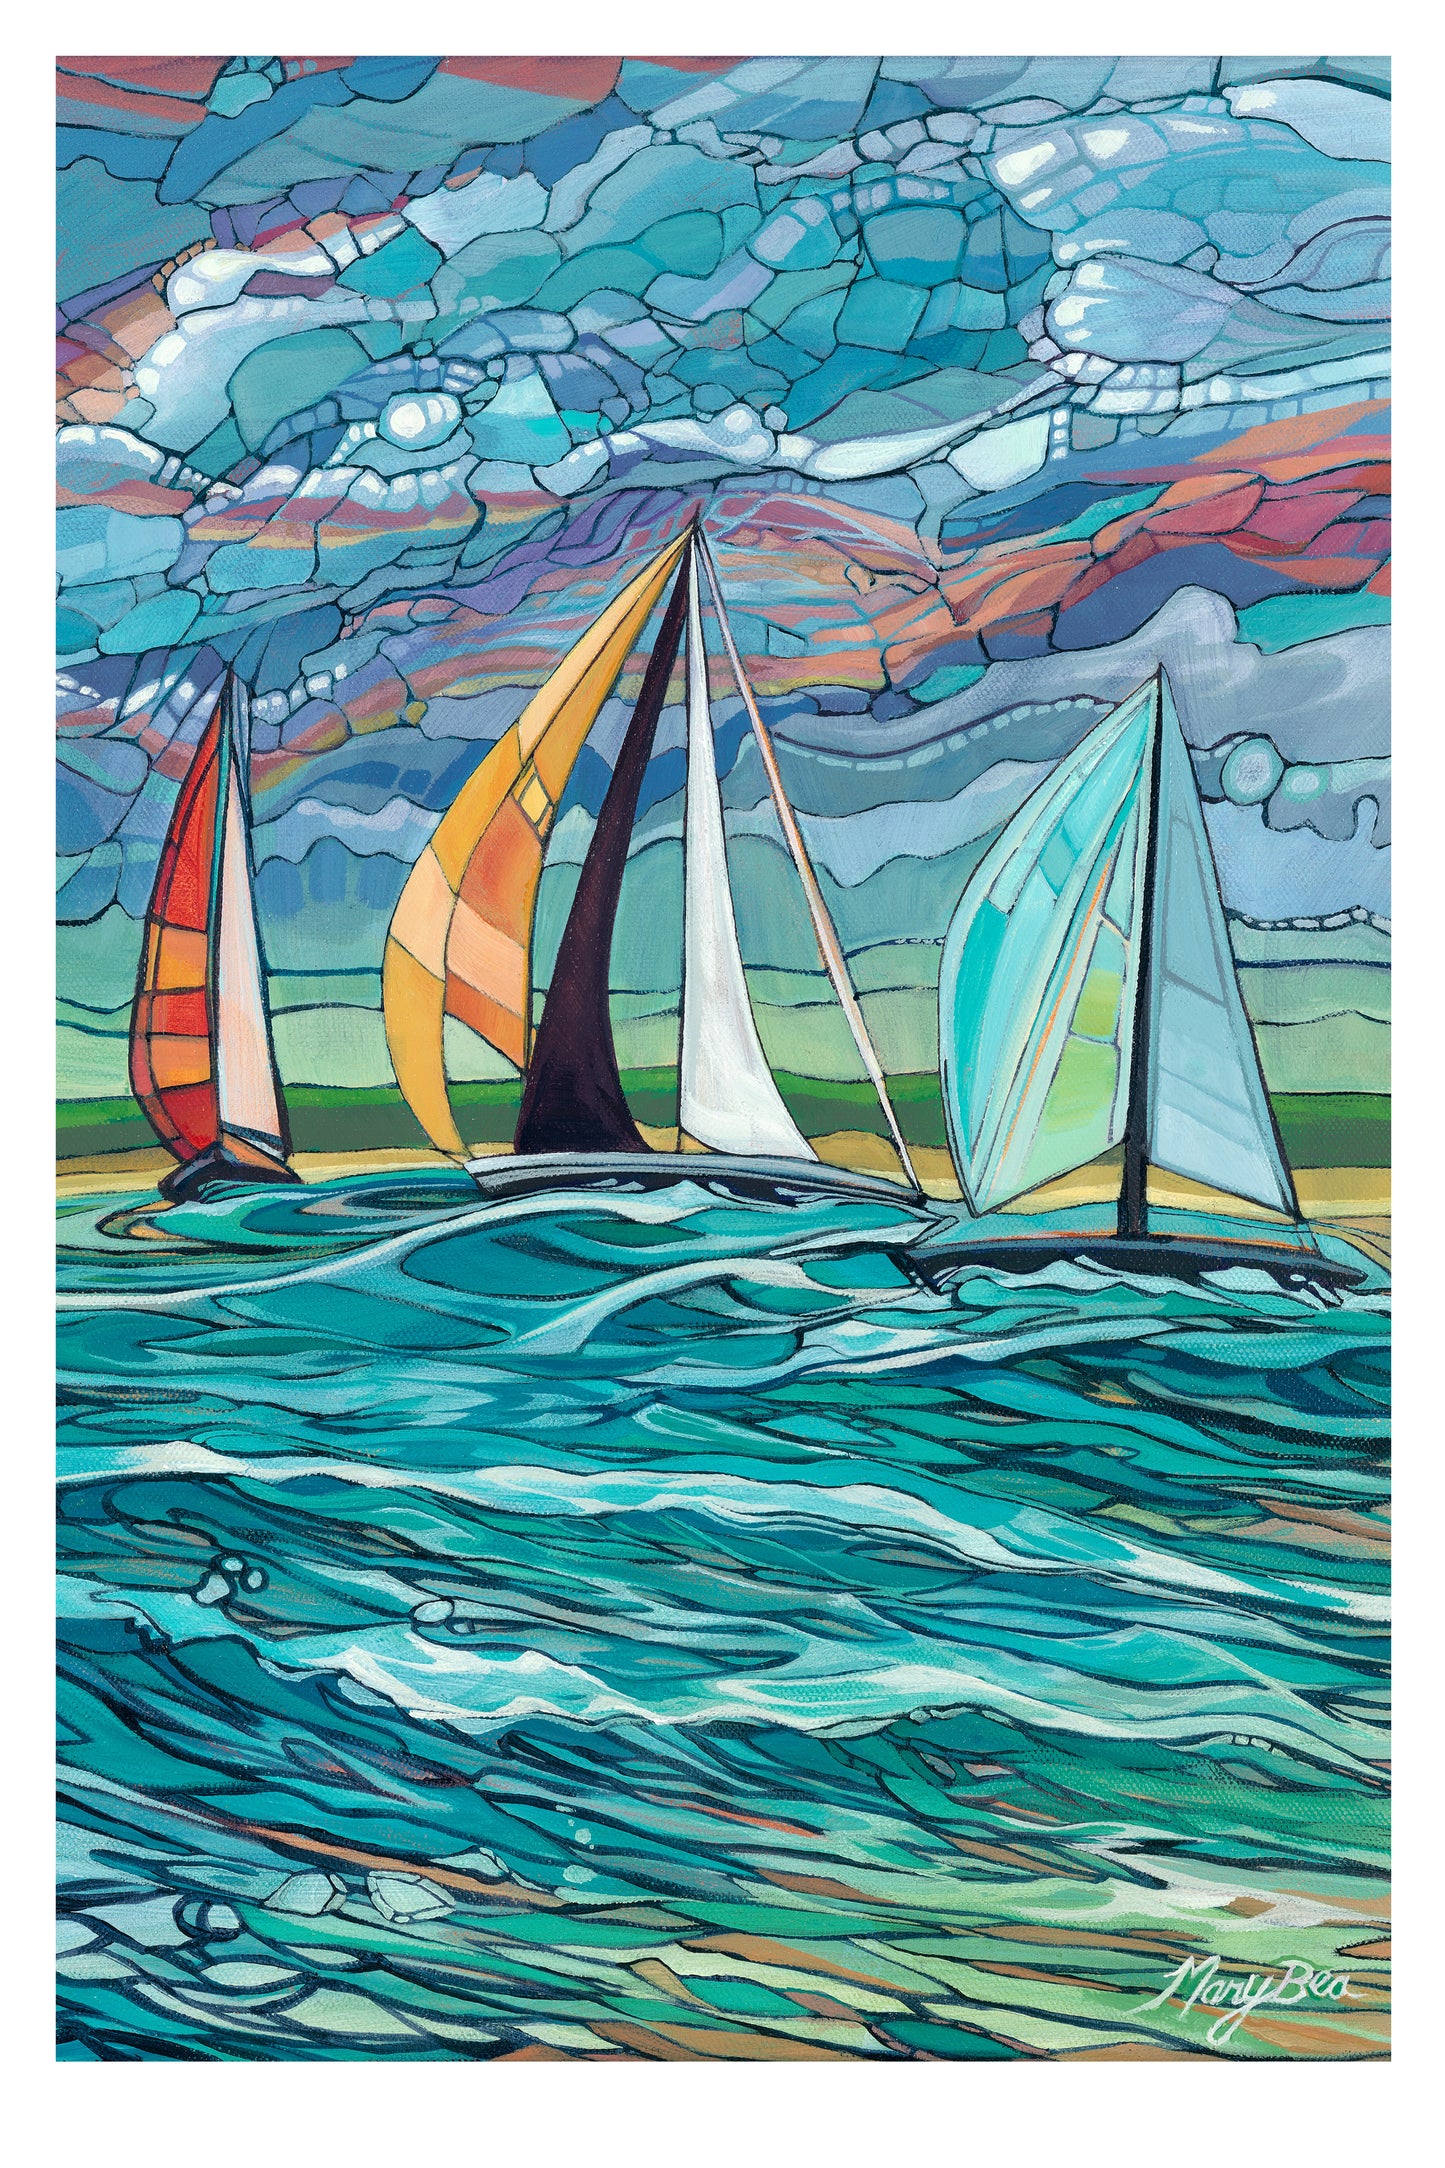 "Stained Glass Sailboats" print on paper